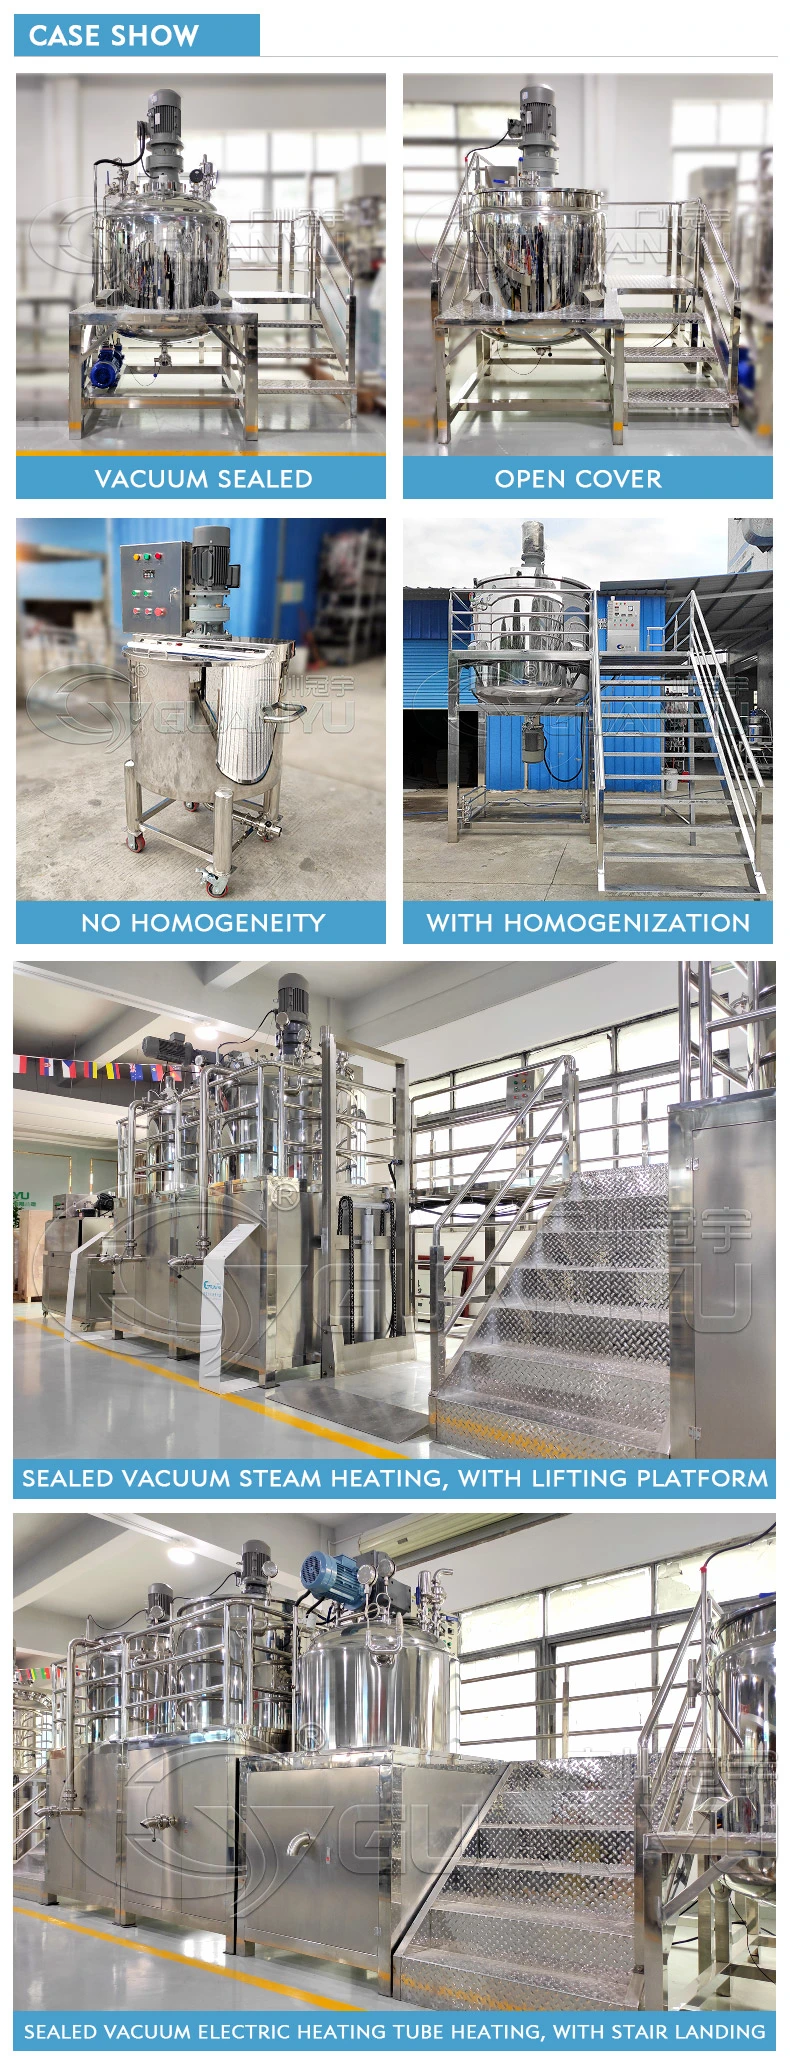 Best Price Liquid Homogenizer Tank Electric Steam Heating Mixer Jacketed Stainless Steel Mixing Tank with Agitator